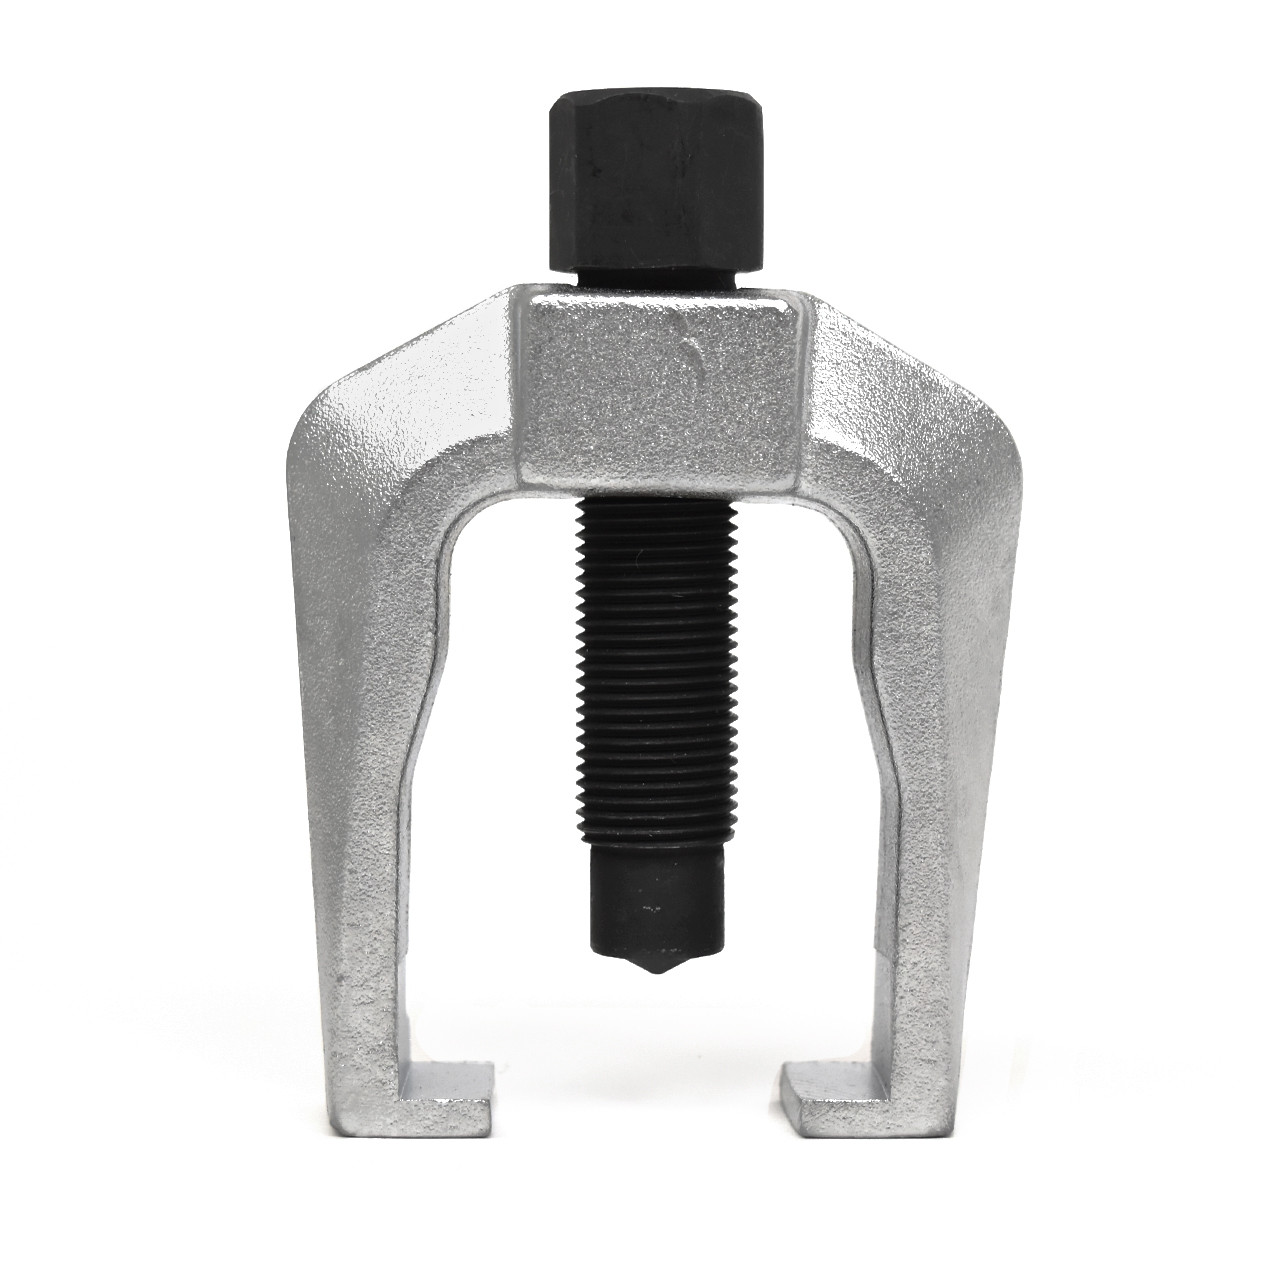 Pitman Arm or Tie Rod End Puller Separator Tool 1-1/16 inch (27mm) [TL-PAP01]